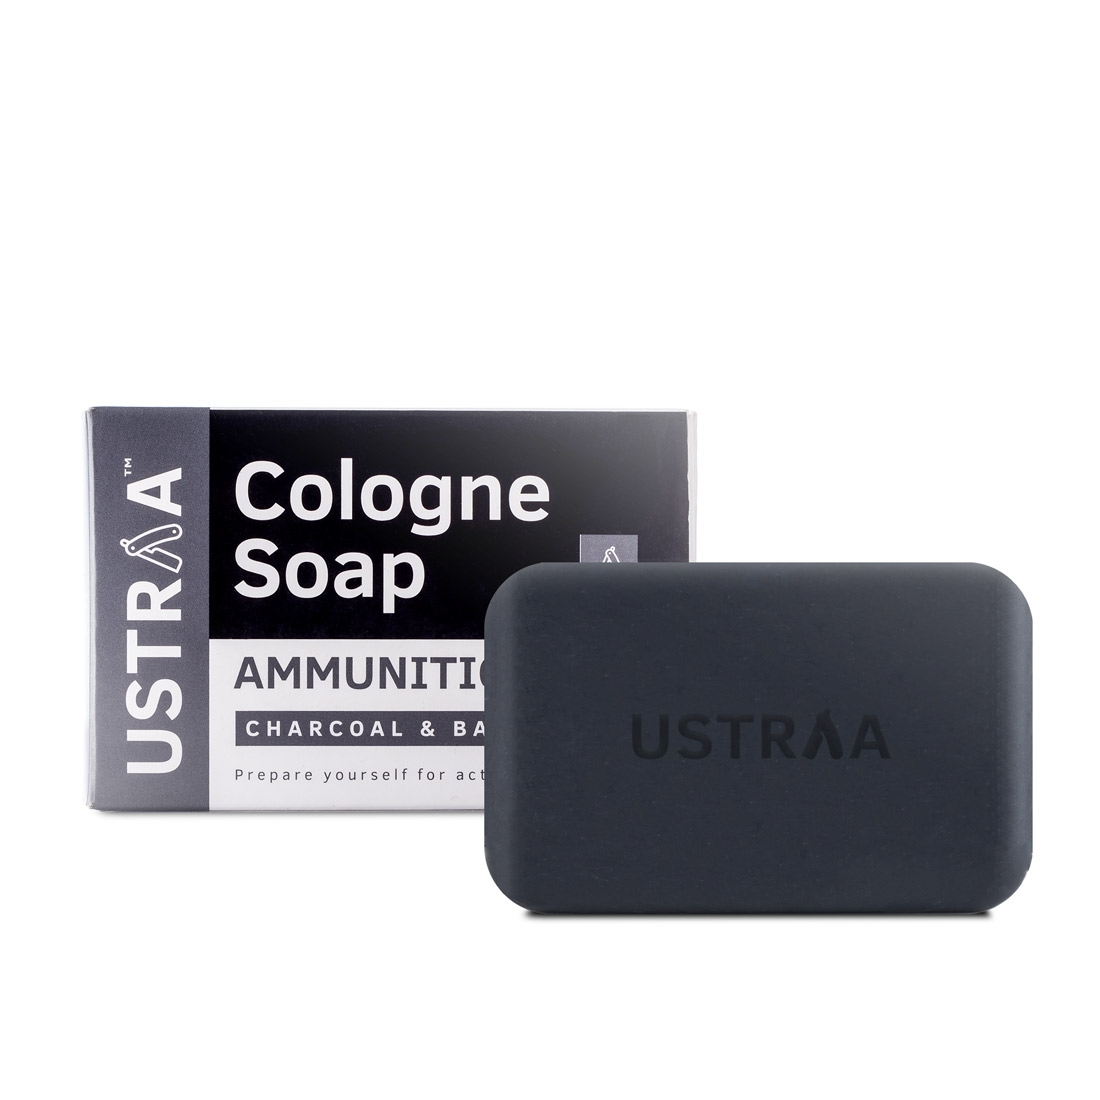 Ustraa | Ustraa Body Lotion Germ Free & Cologne Soap Ammunition - Pack of 3 2